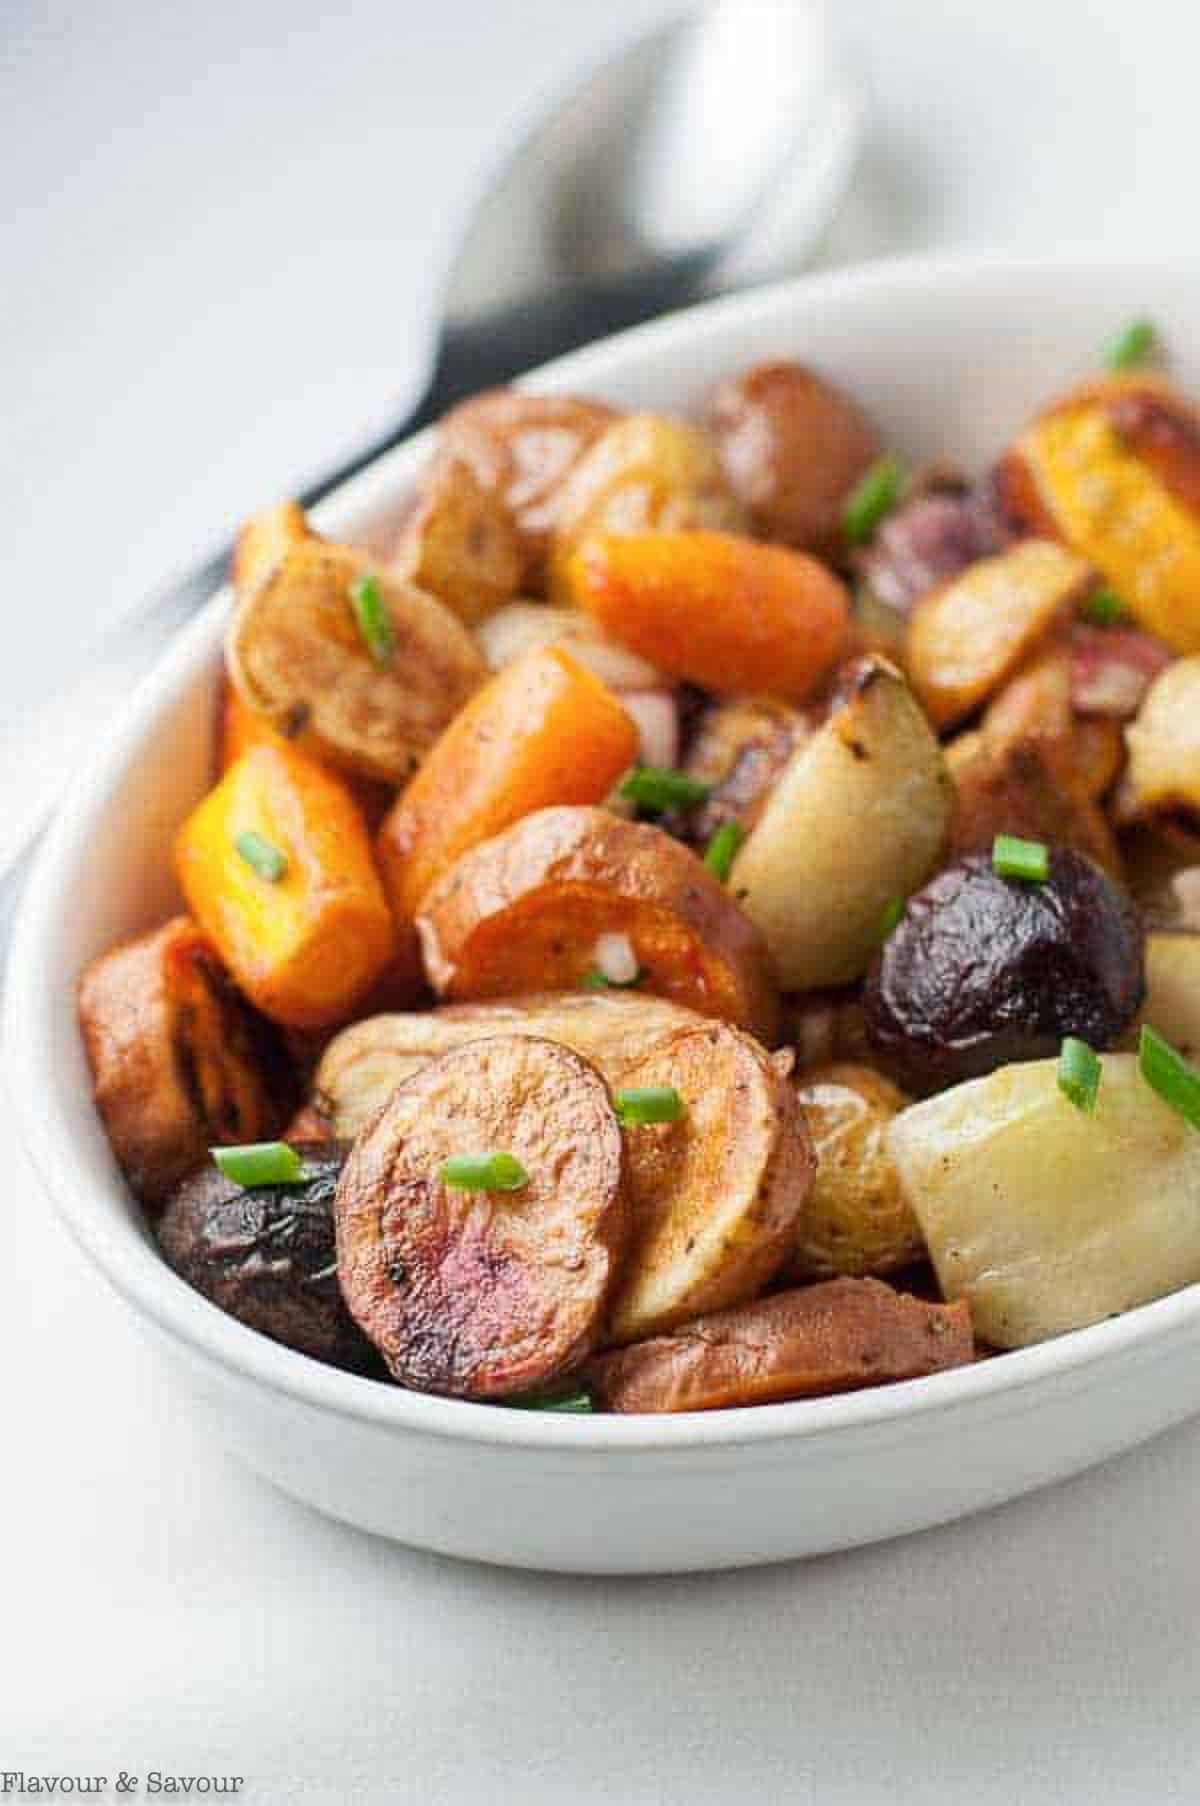 apple cider roasted root vegetables in an oval dish with a serving spoon.